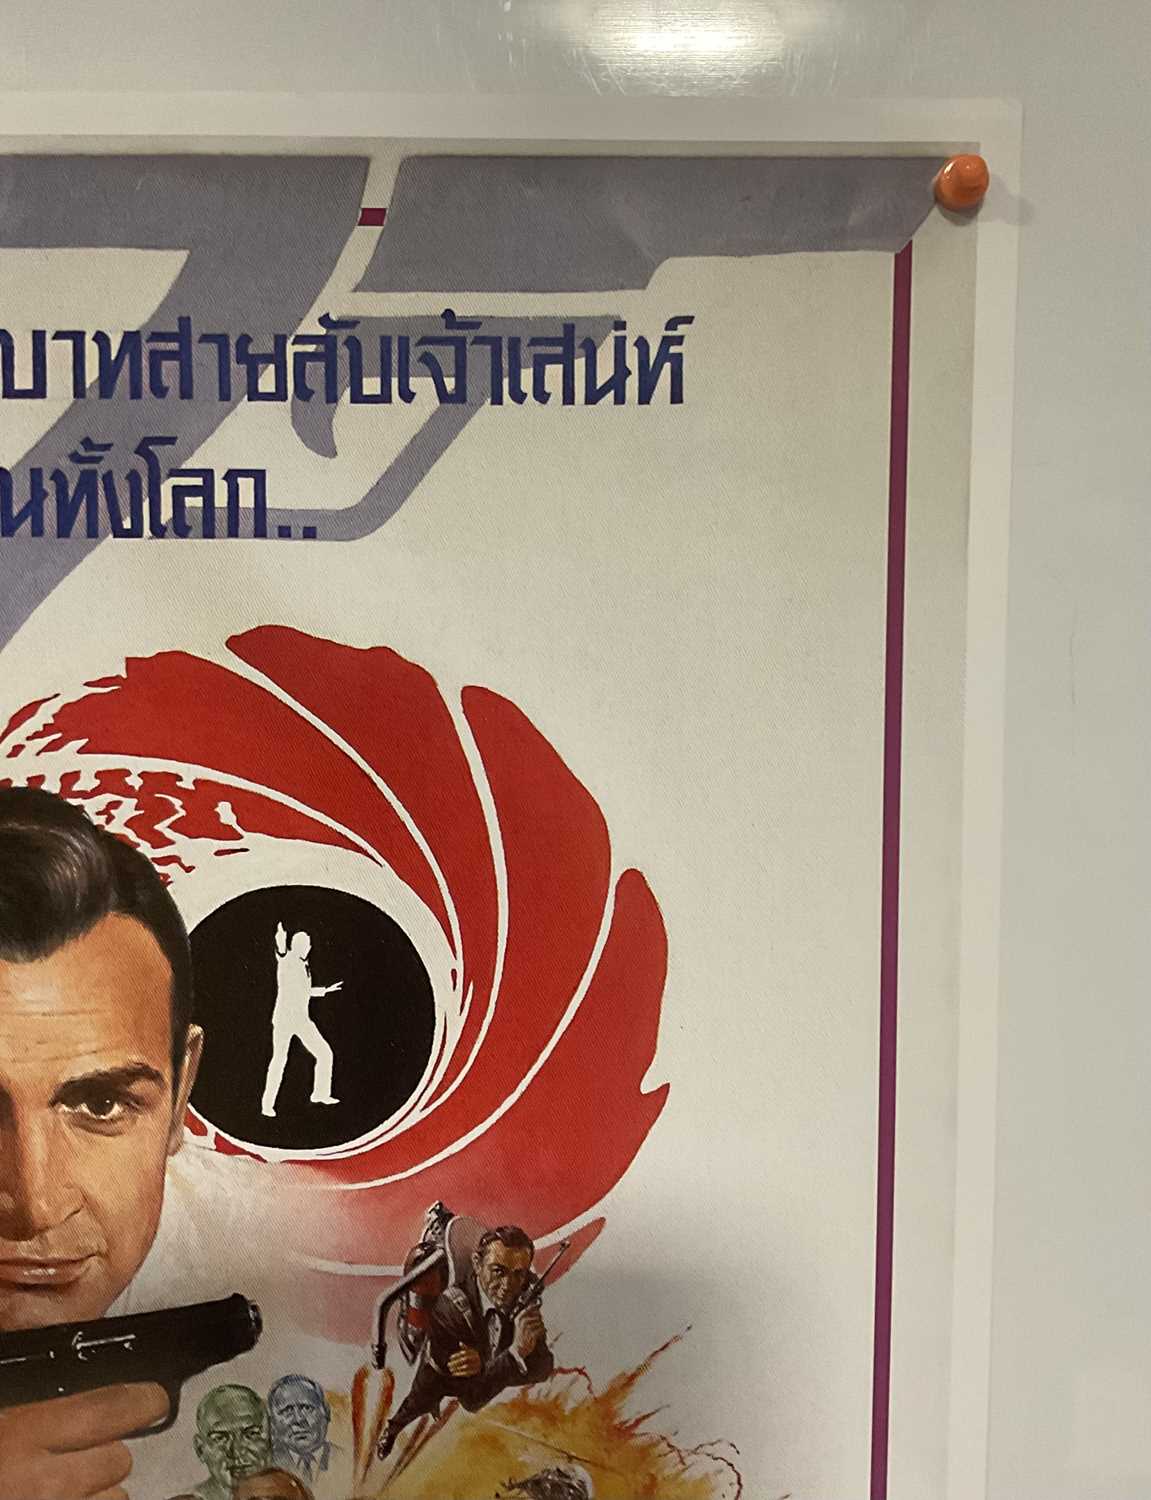 JAMES BOND - A Thai film festival poster signed and dated by the artist Banhan Thaitanaboon, 23" x - Image 5 of 5